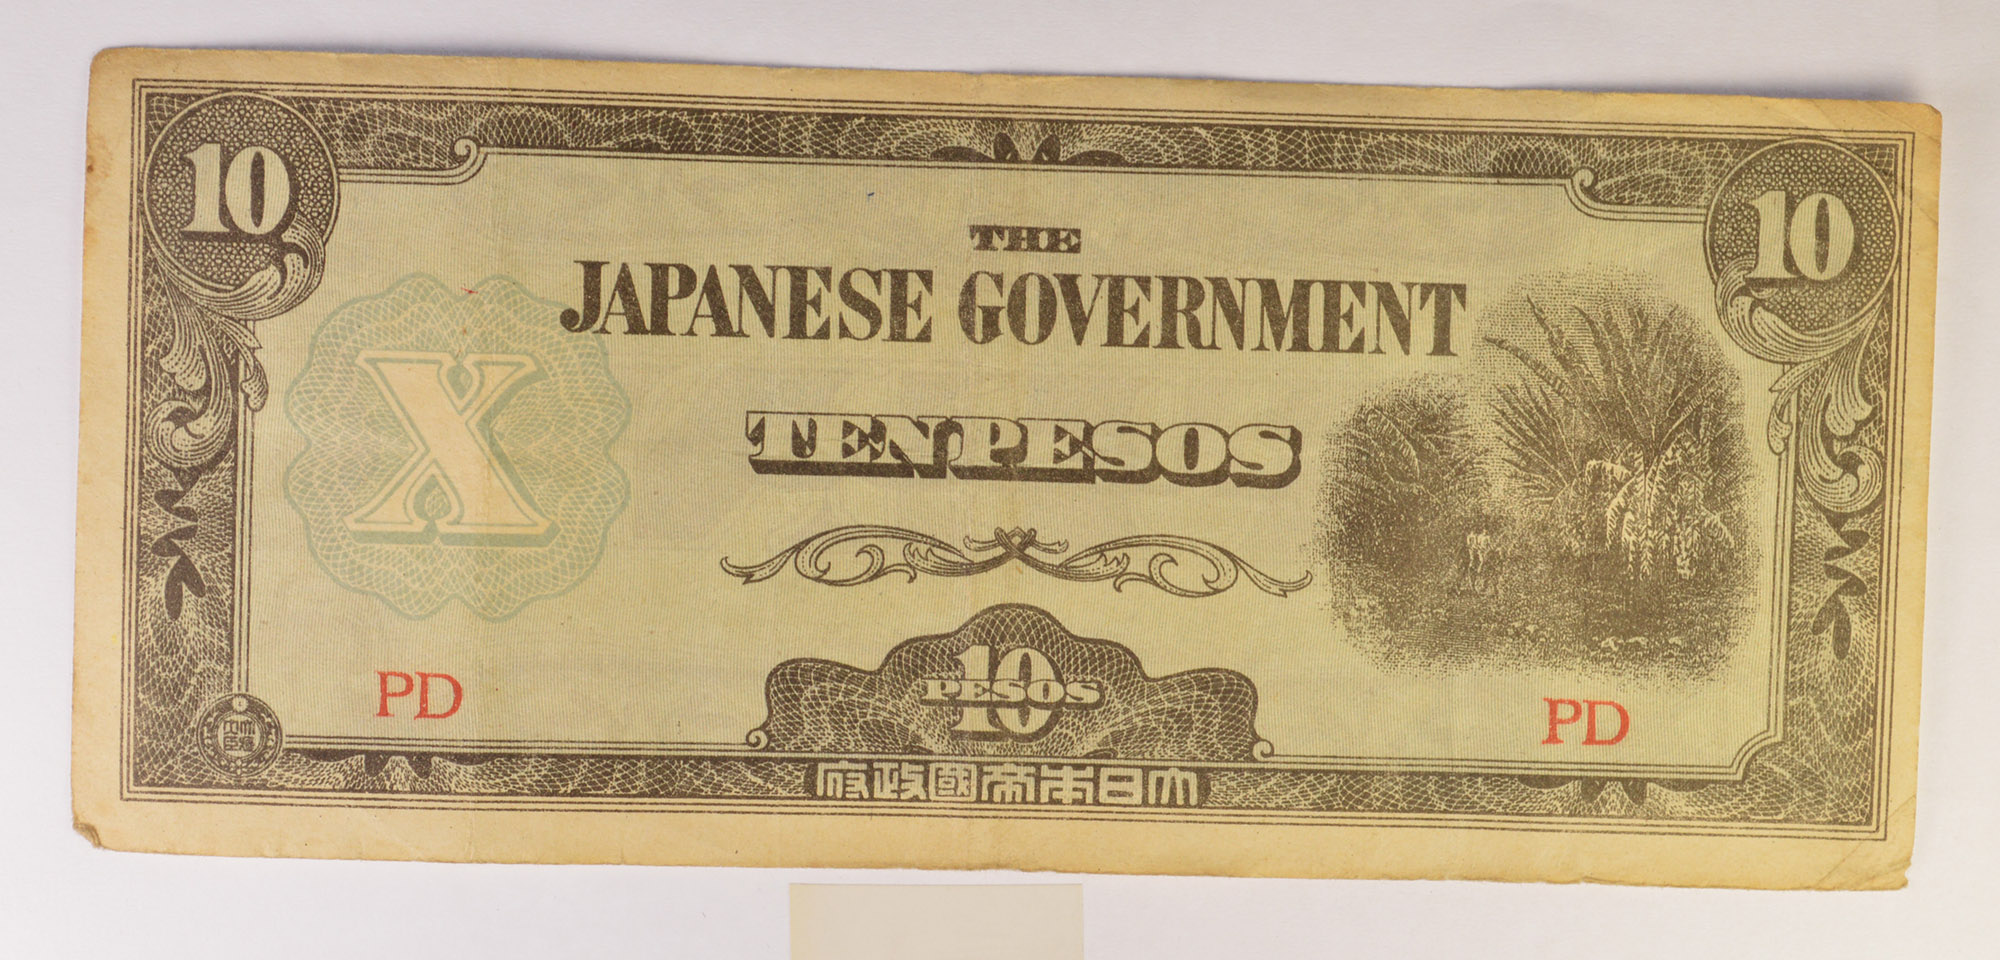 Japanese Government TEN Peso Bank Note Philippines Invasion Currency ...